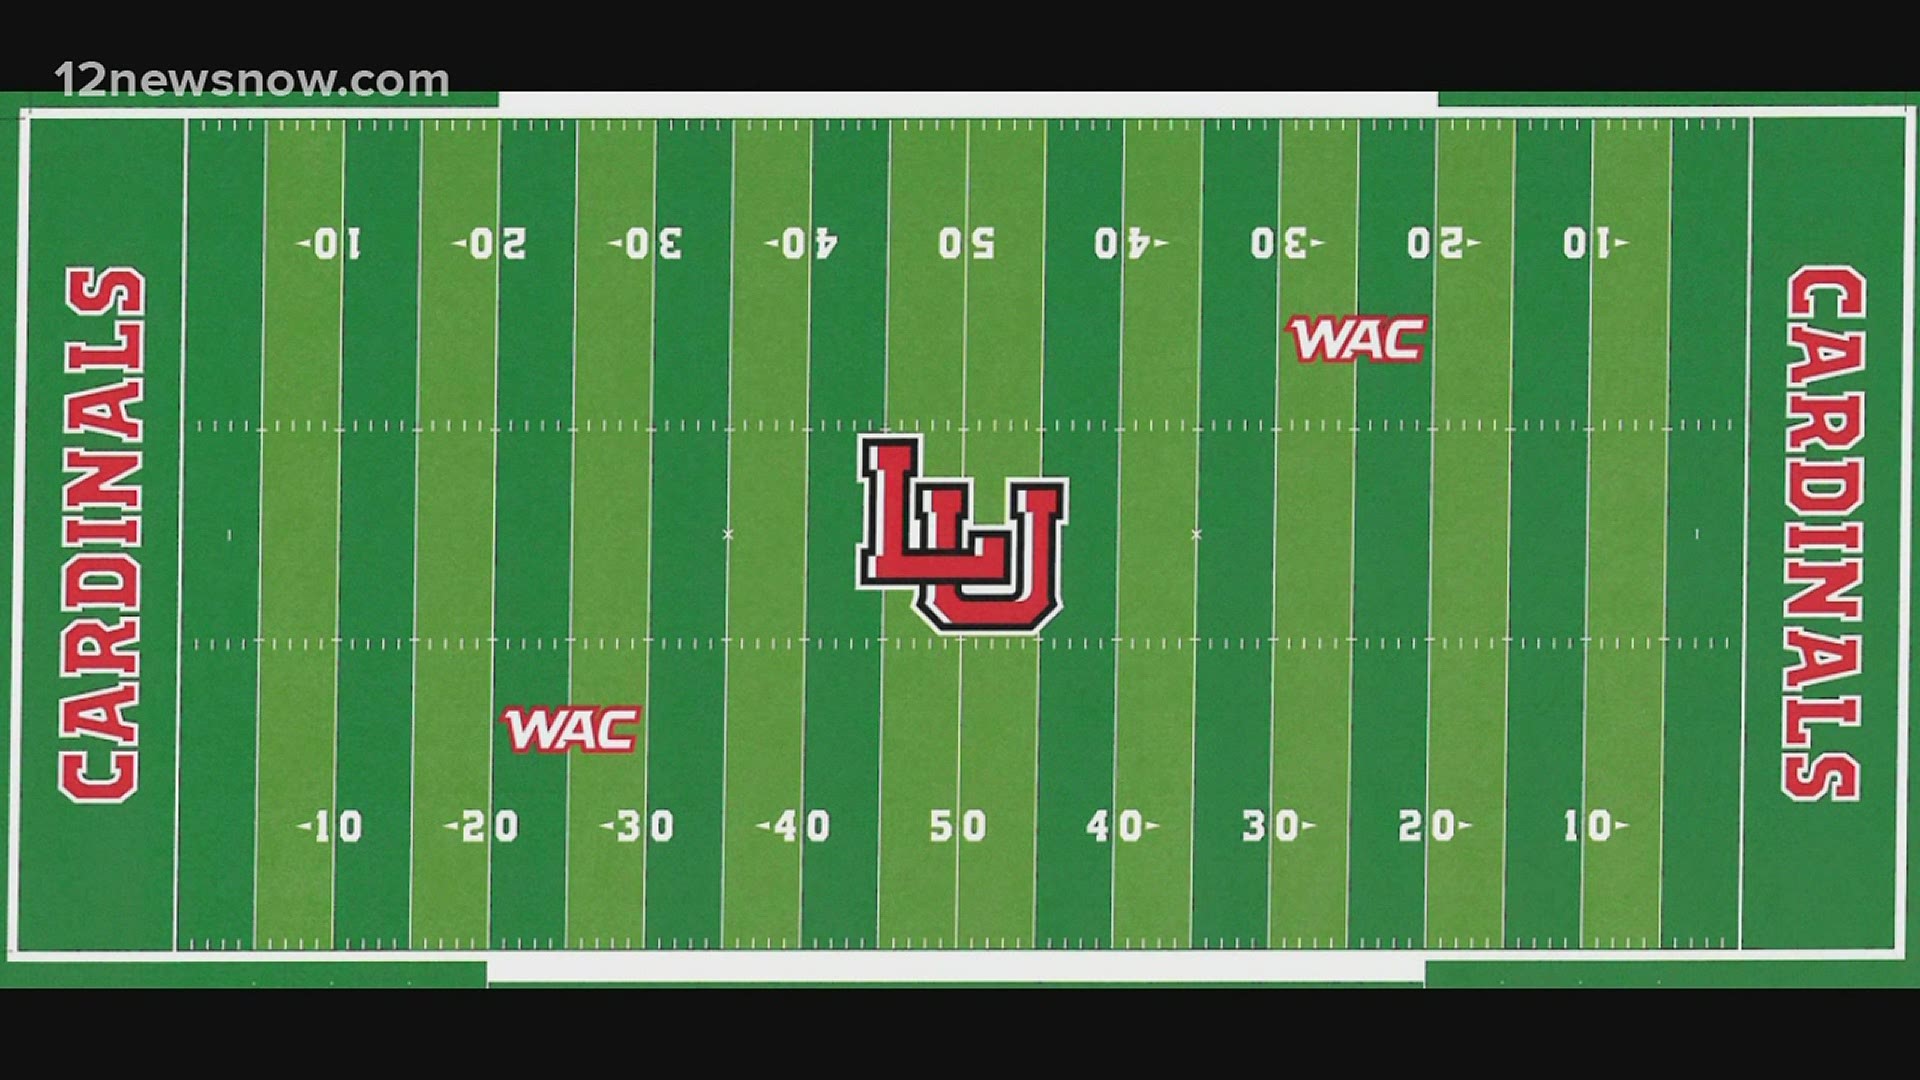 Provost Umphrey Stadium surface will have a new look for first season in WAC